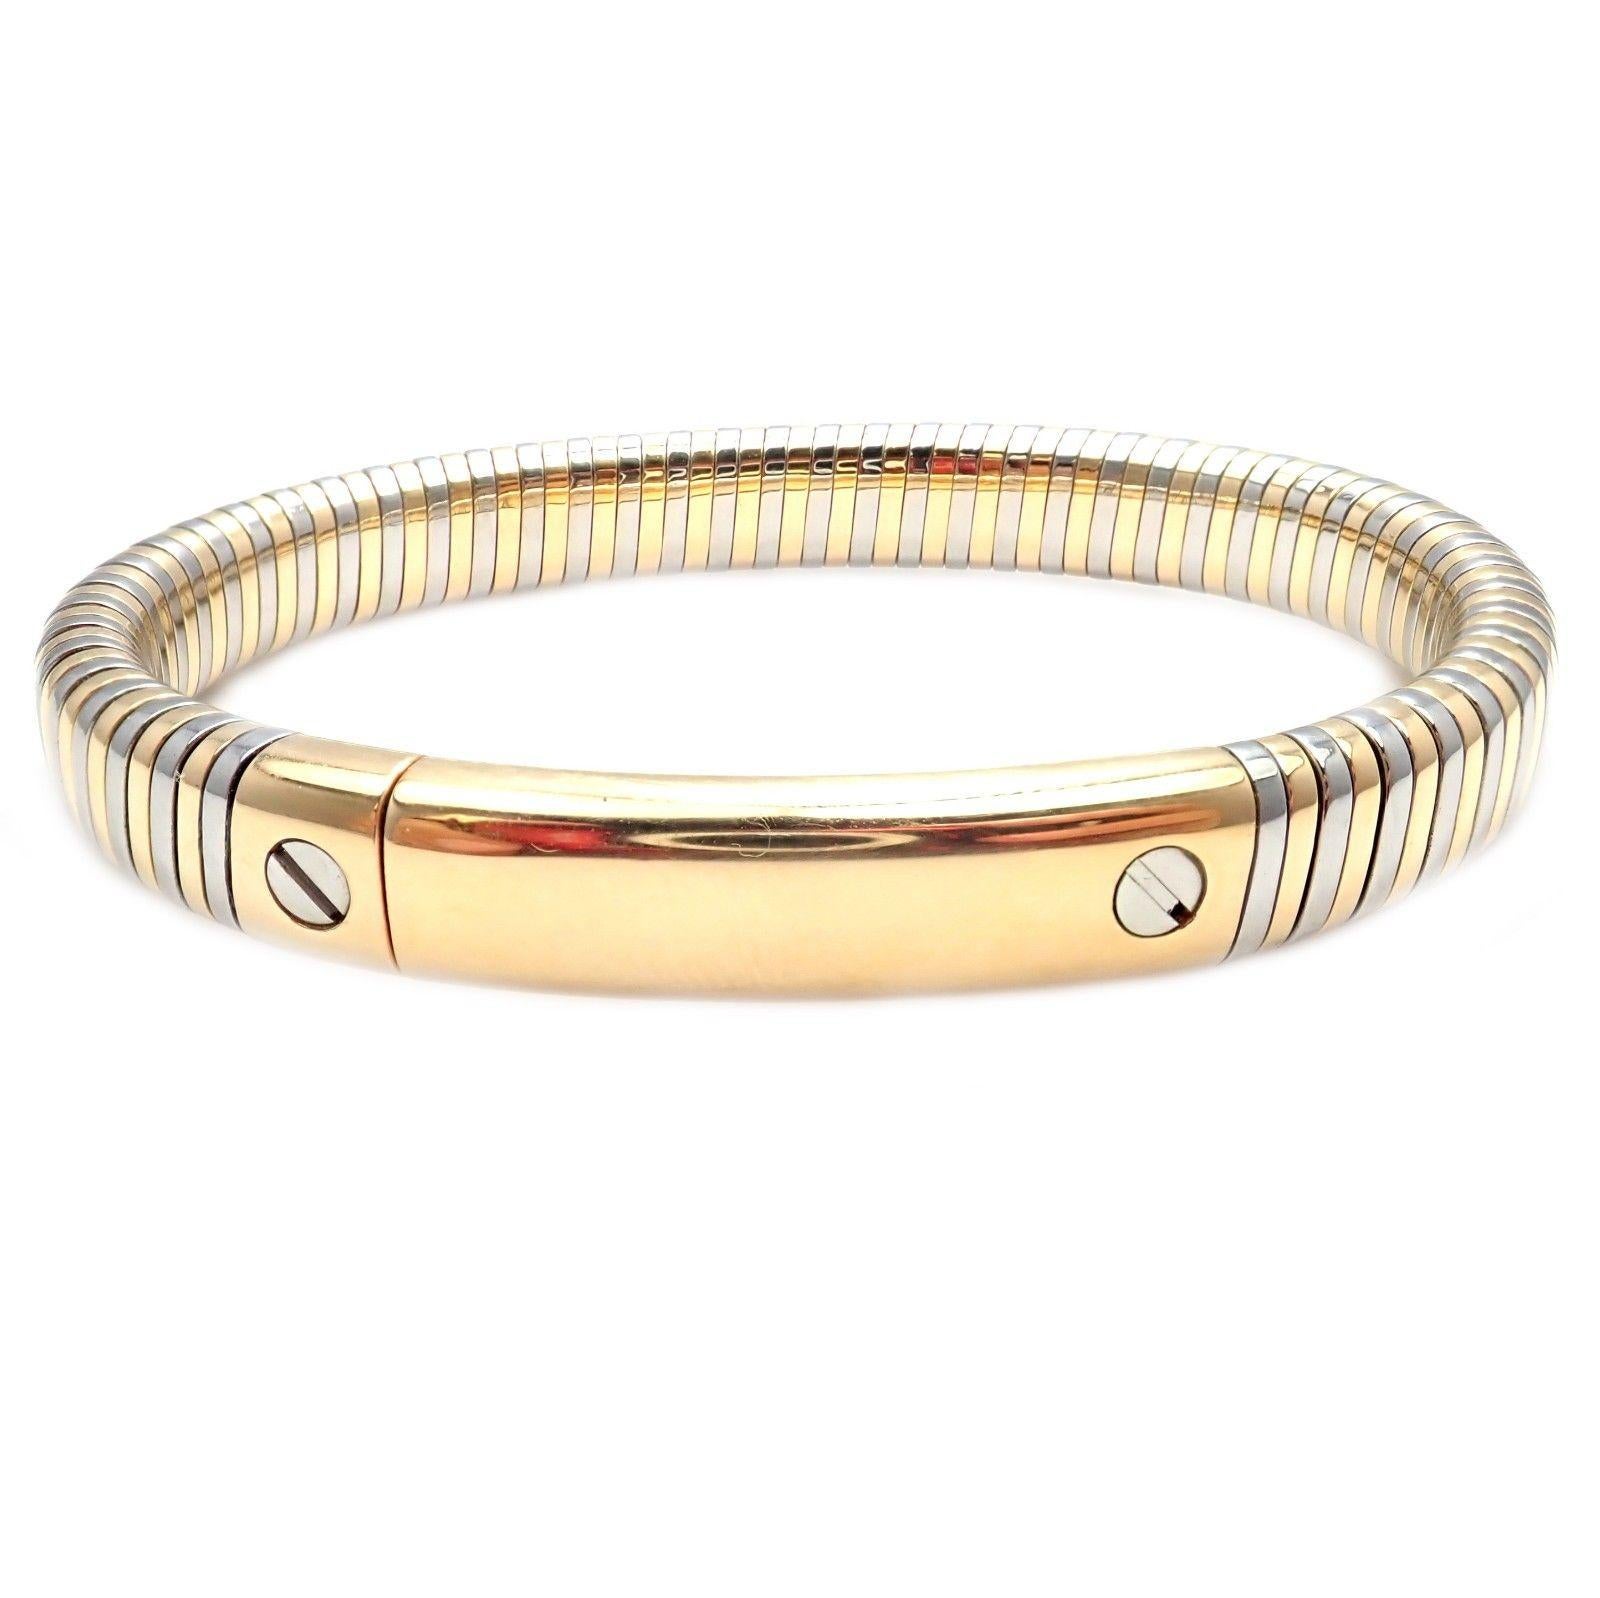 Vintage Van Cleef & Arpels Yellow Gold Steel Bangle Bracelet In Excellent Condition For Sale In Holland, PA